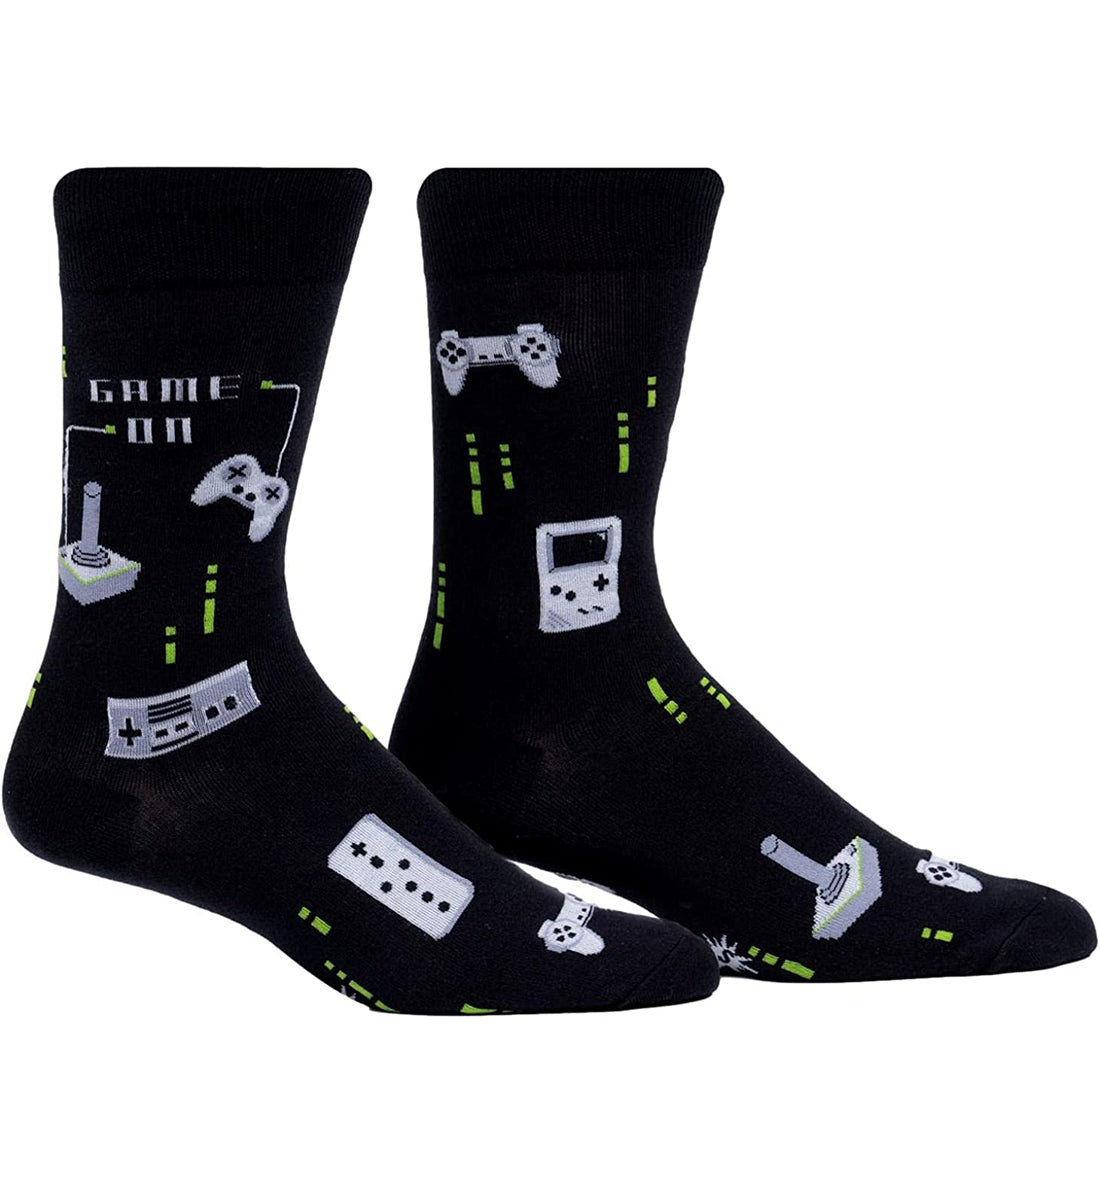 SOCK it to me Men&#39;s Crew Socks (MEF0546),Game On - Game On,One Size